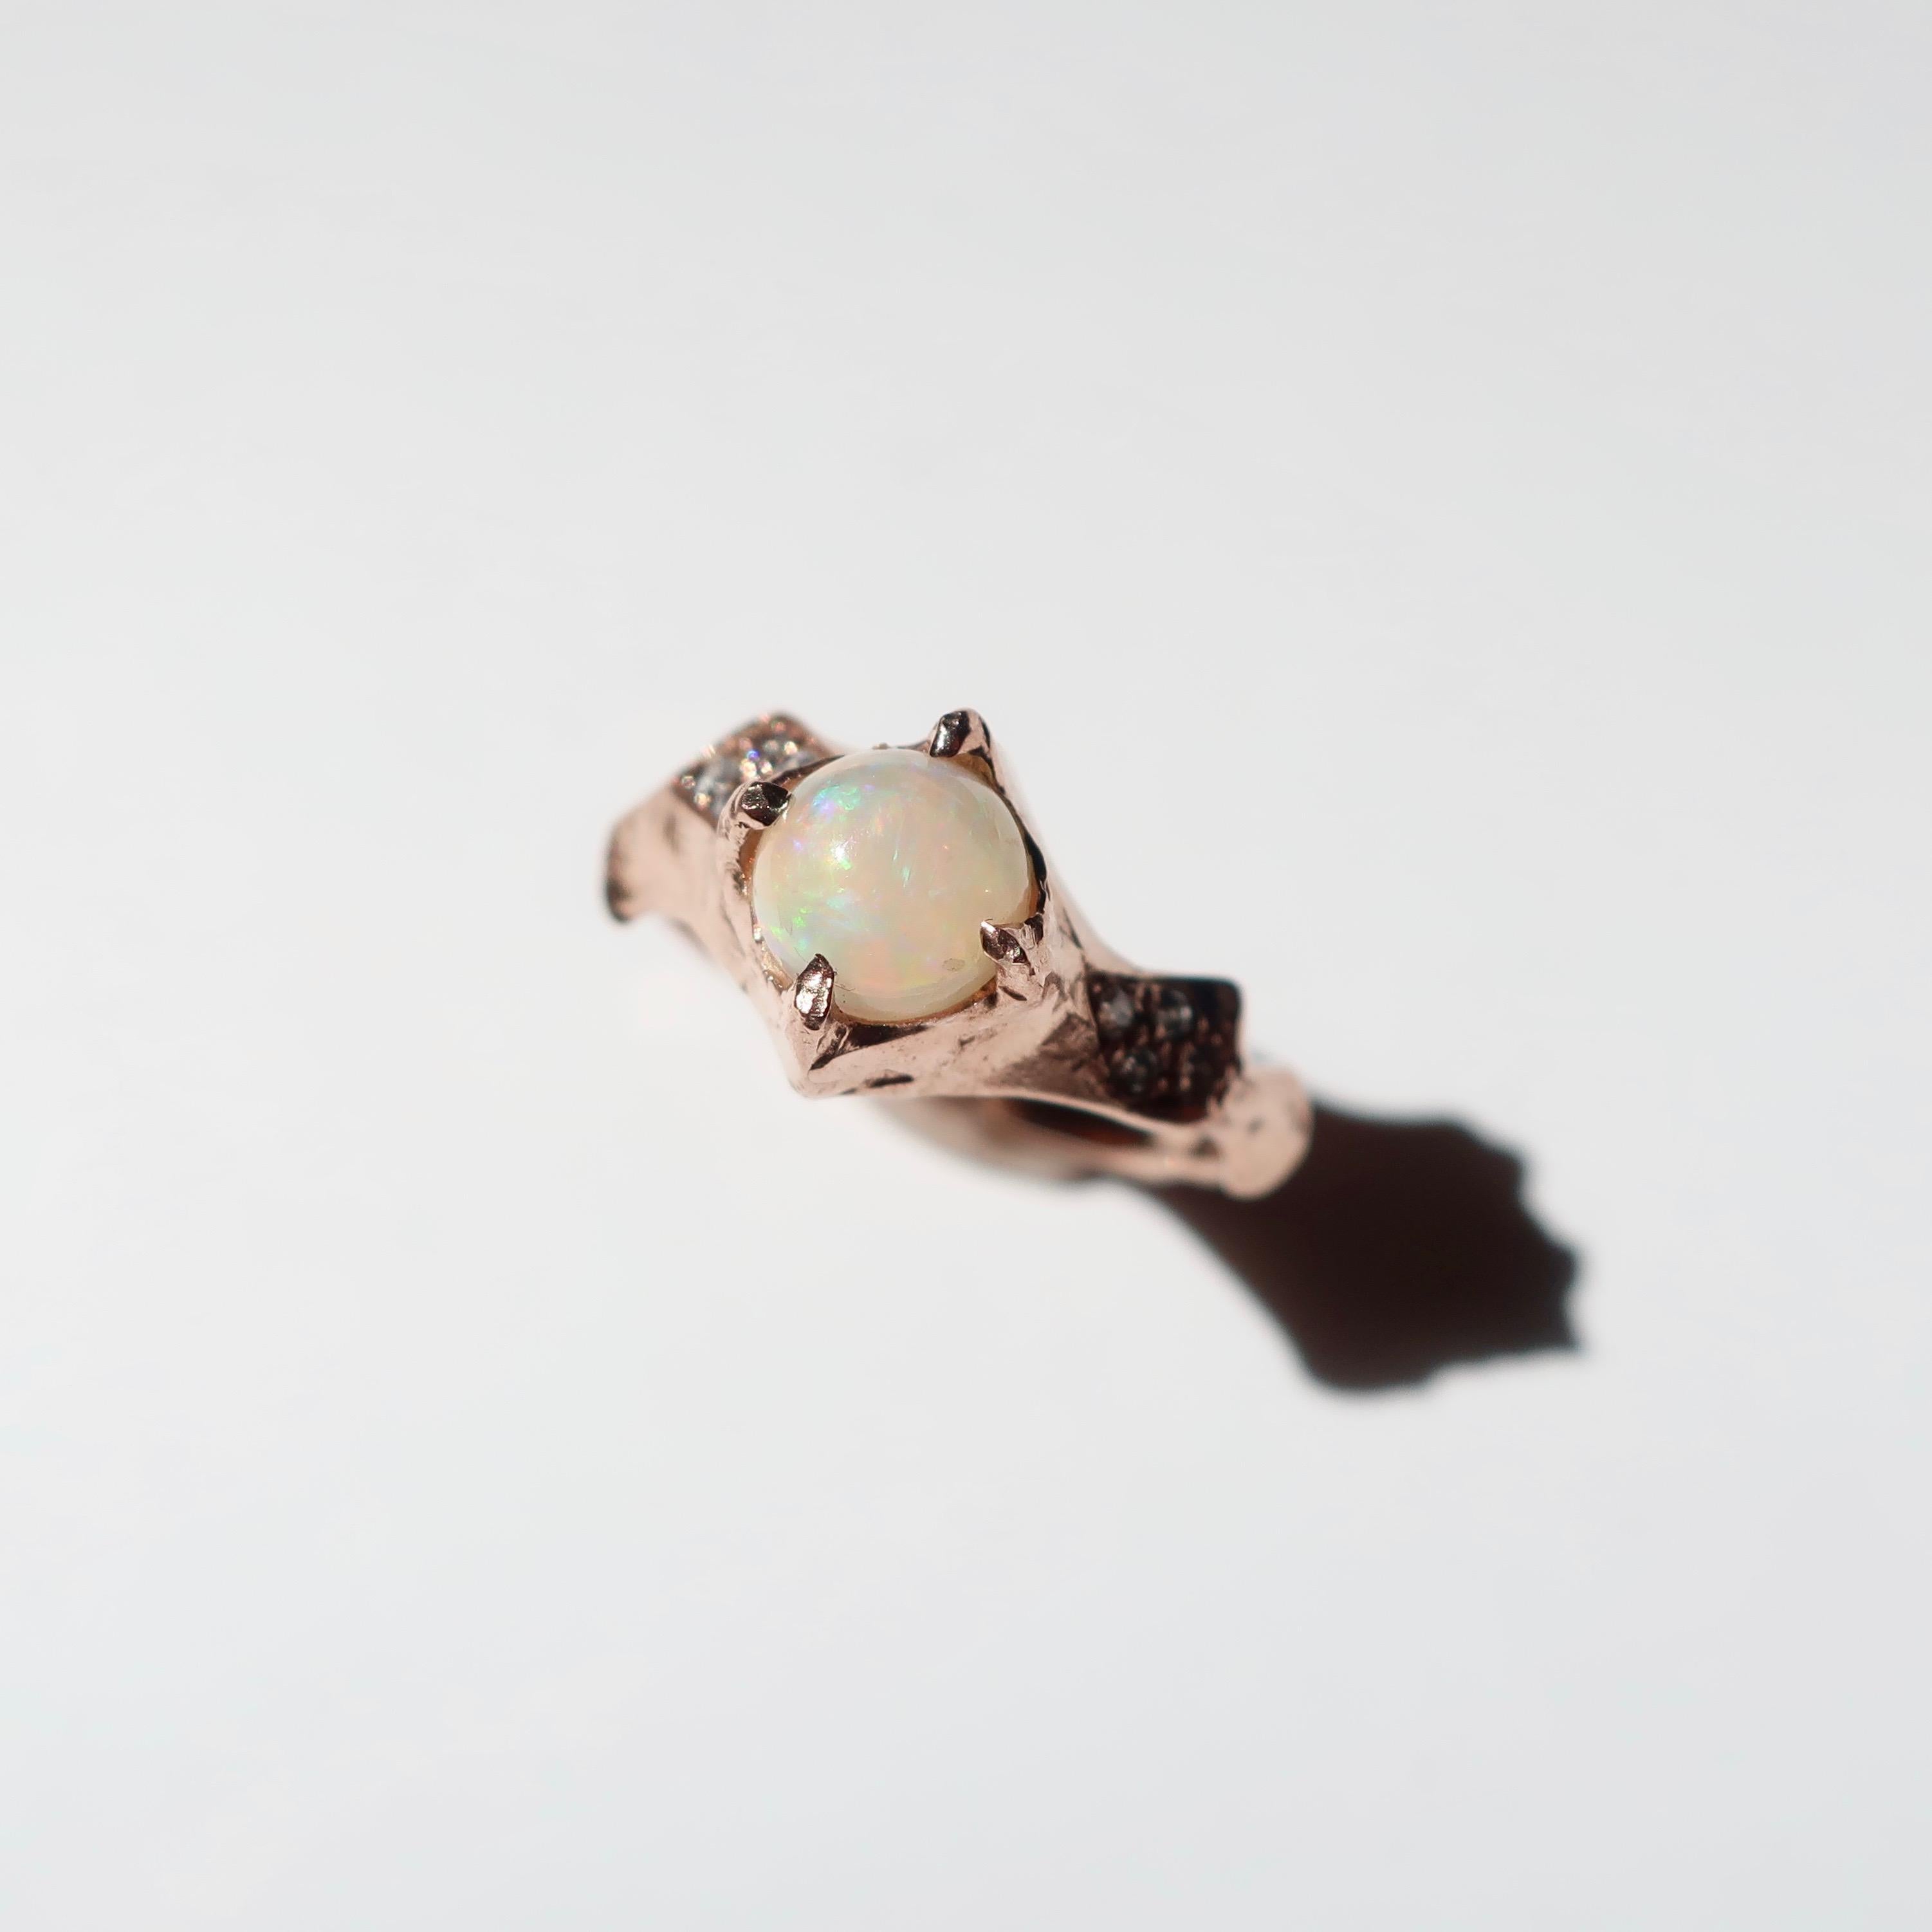 Hand crafted ring in 14K Rose Gold with a clustering of pave white diamonds on either side.  A 6mm opal cabochon is set in the middle that has  beautiful pink and yellow flashes. This piece combines timeless elegance with the signature hand texture